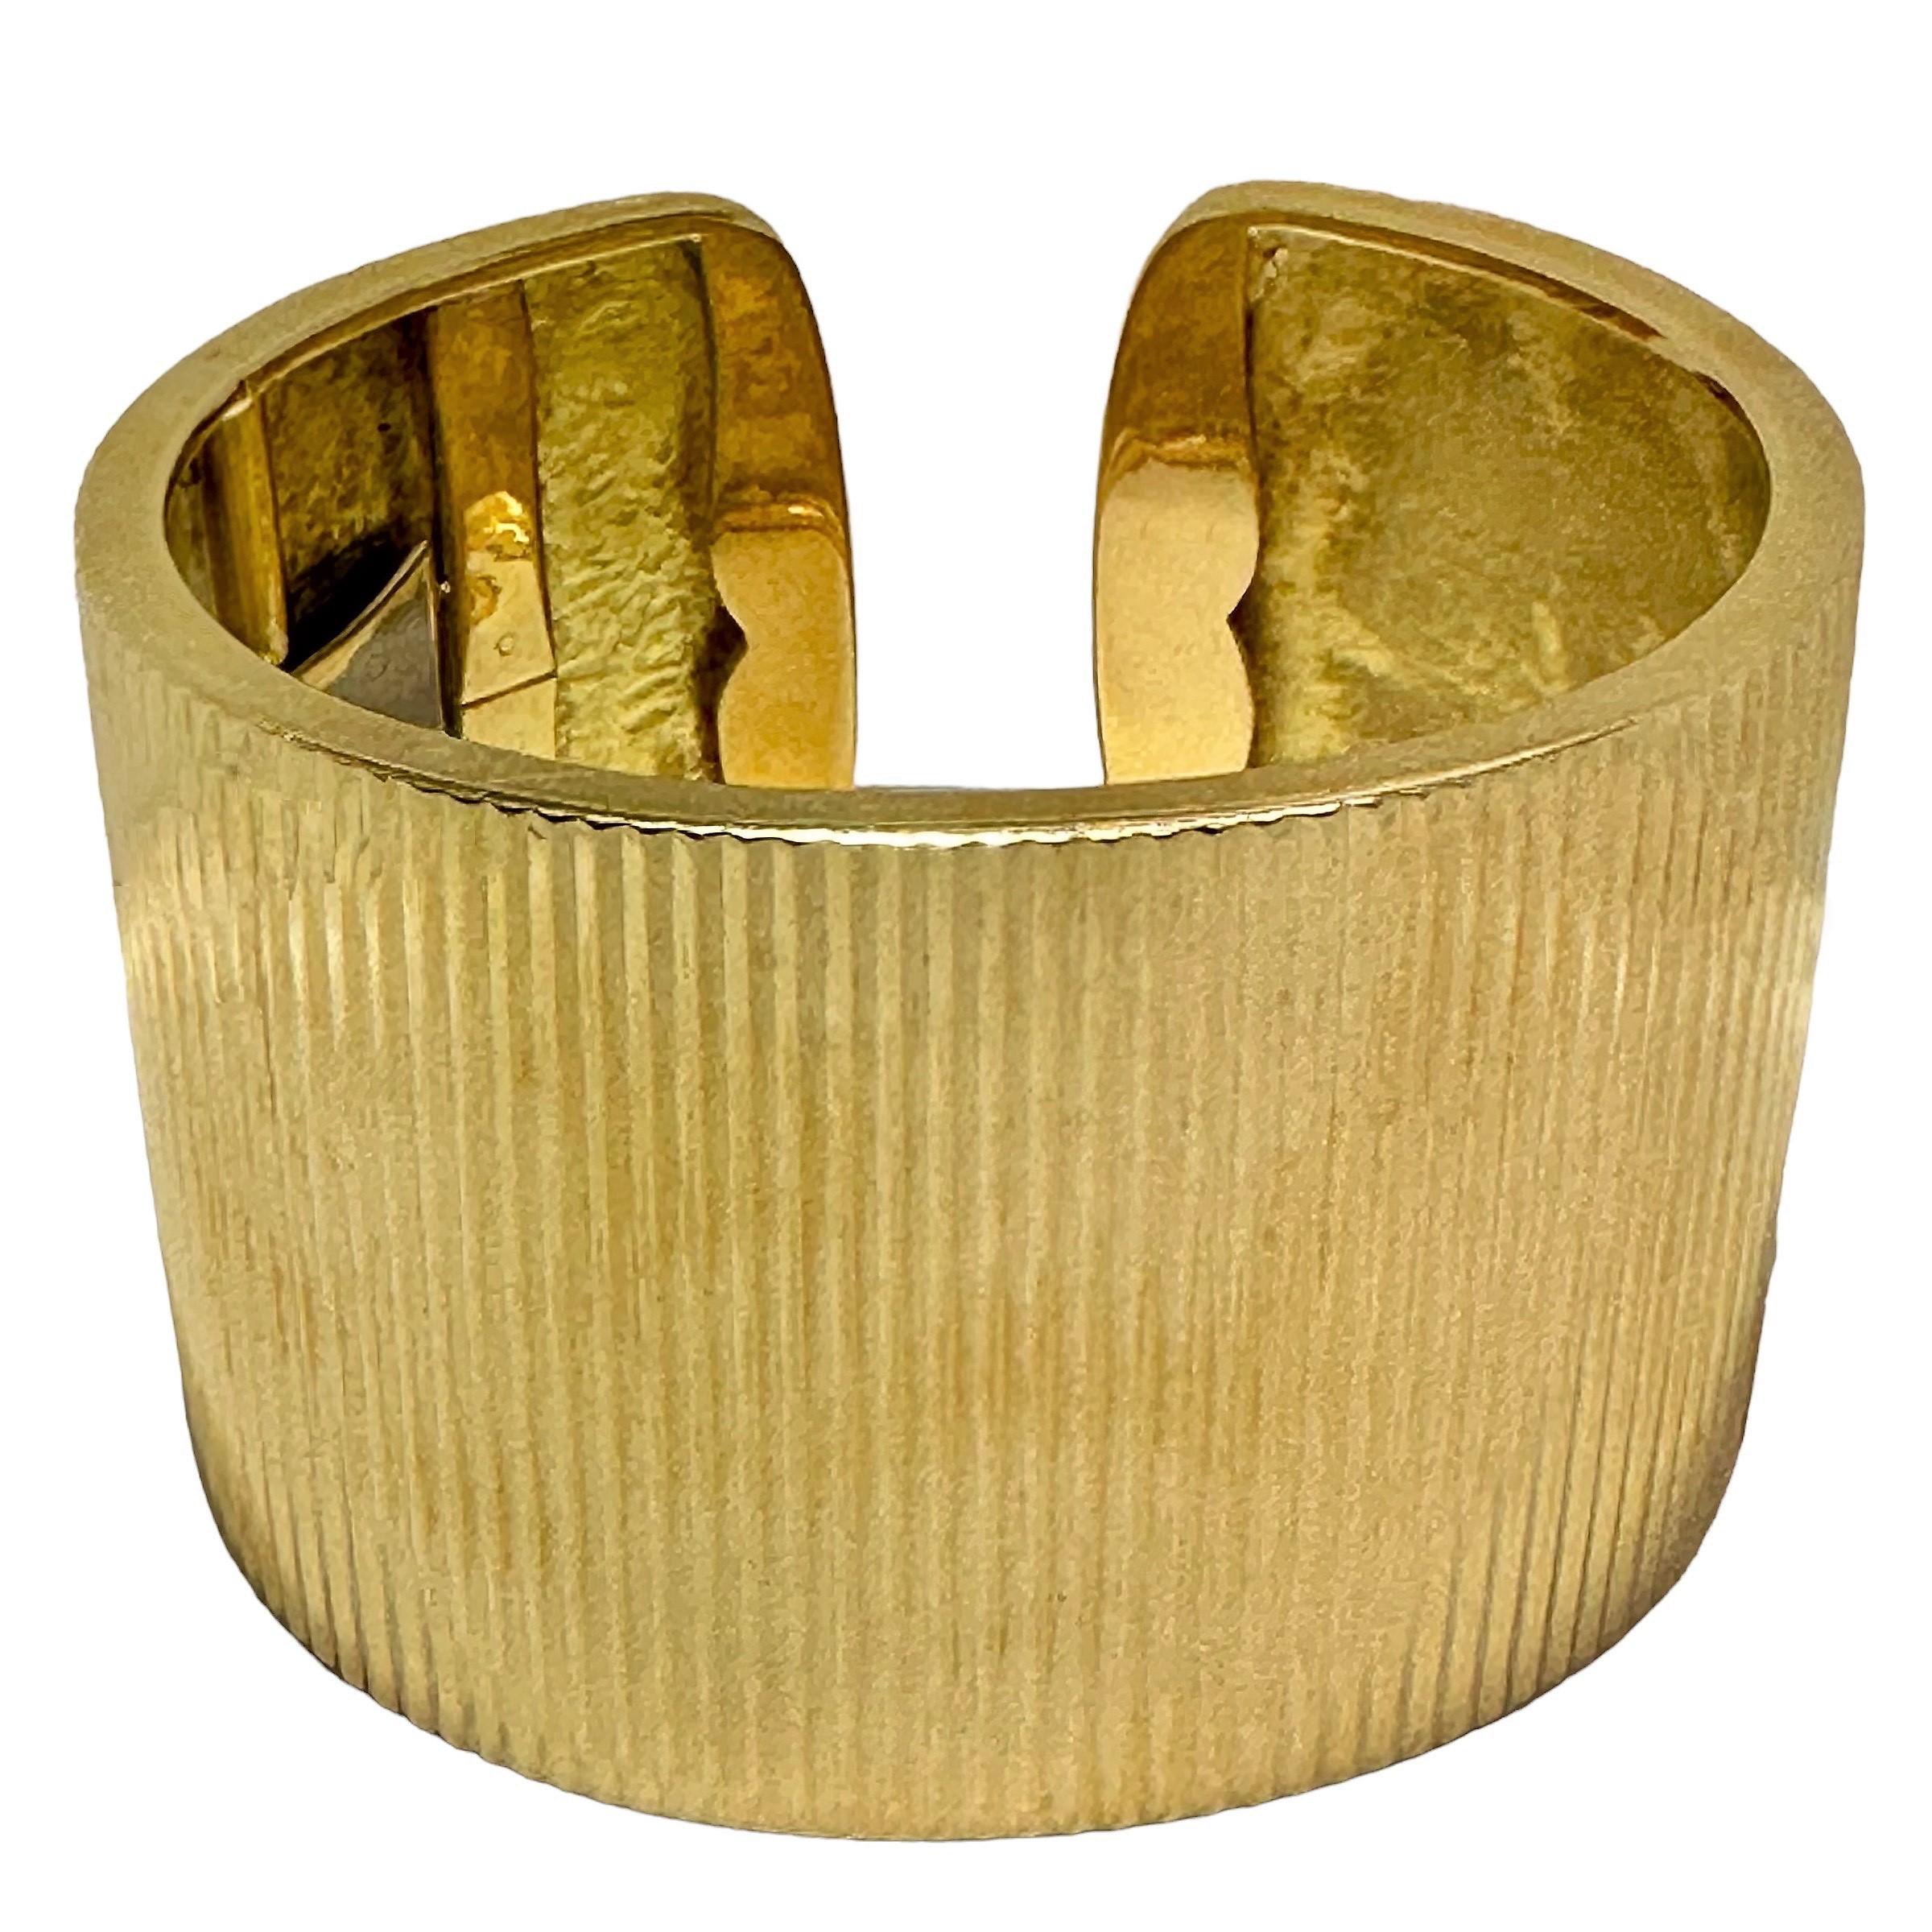 This outstanding 18K yellow gold vintage bracelet measures a full 1 3/4 inches wide at the center and is finished vertically in deep, pointed beveling over it's entire surface. This is a wonderful example of how fine gold cuffs used to be made.